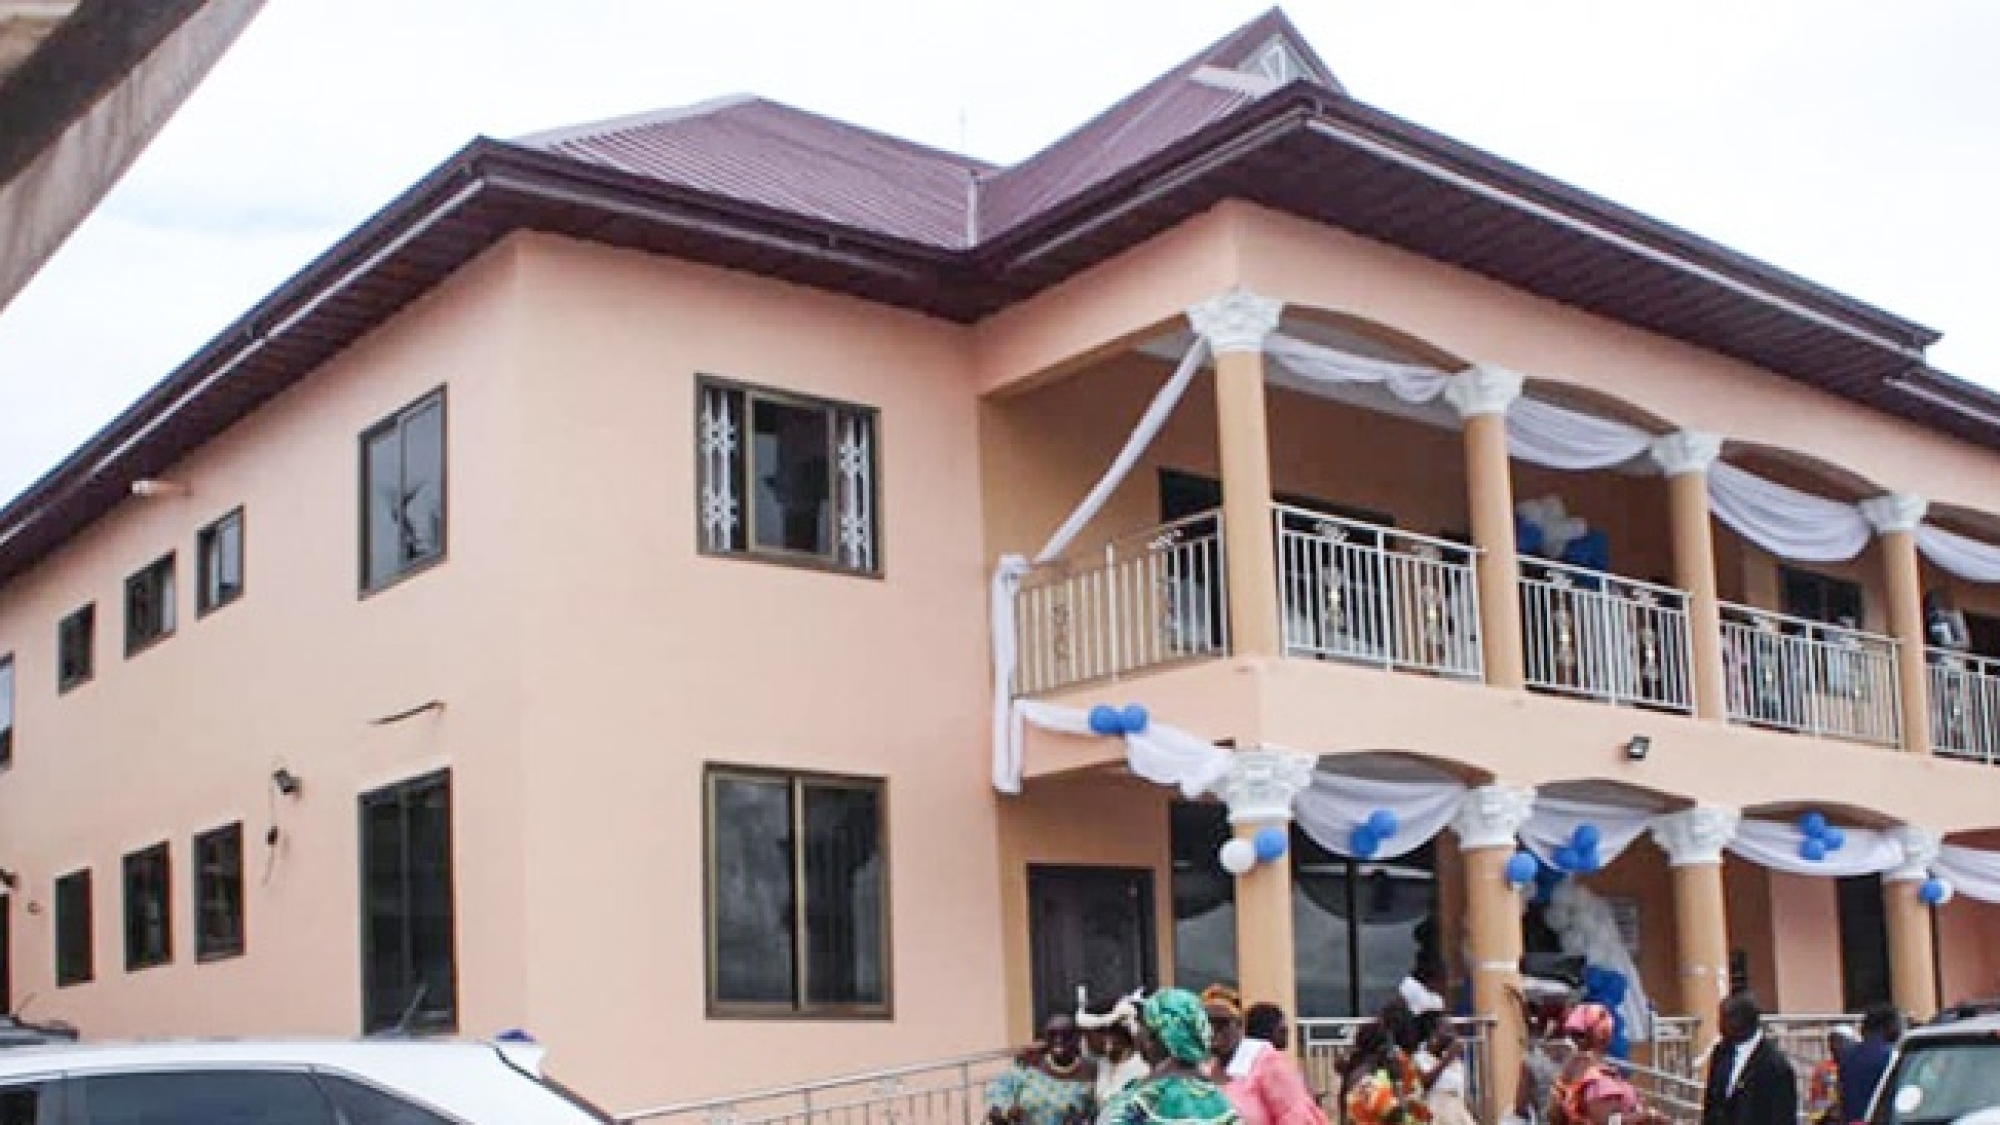 Double Occupancy Mission House For Olebu & Amamorley Districts Dedicated WEB